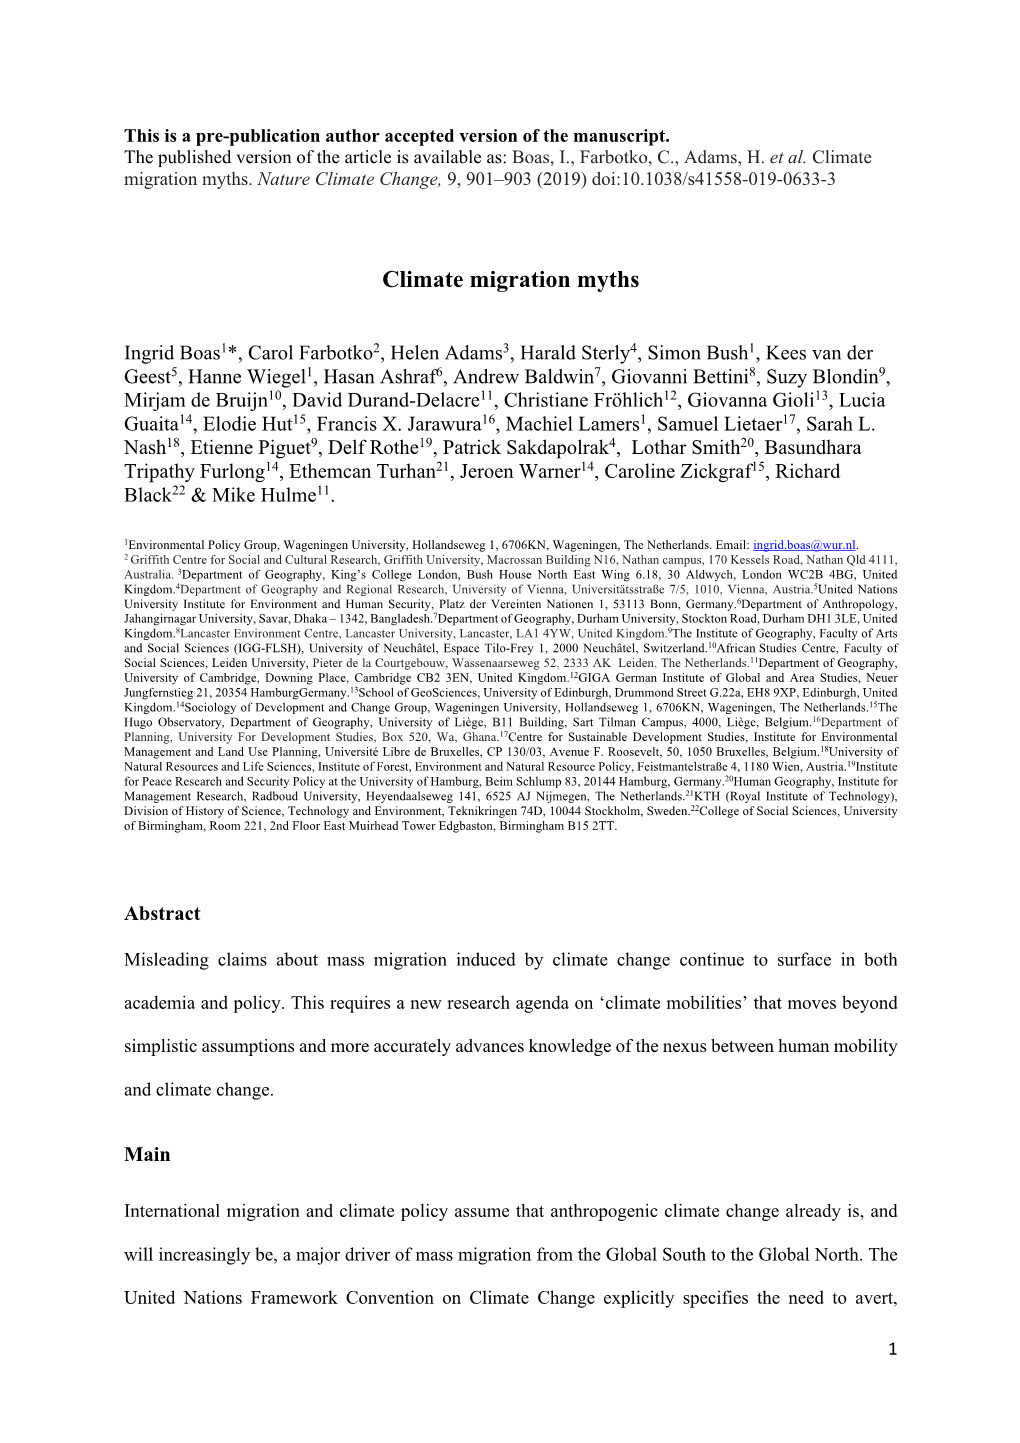 Climate Migration Myths Author Accepted Version